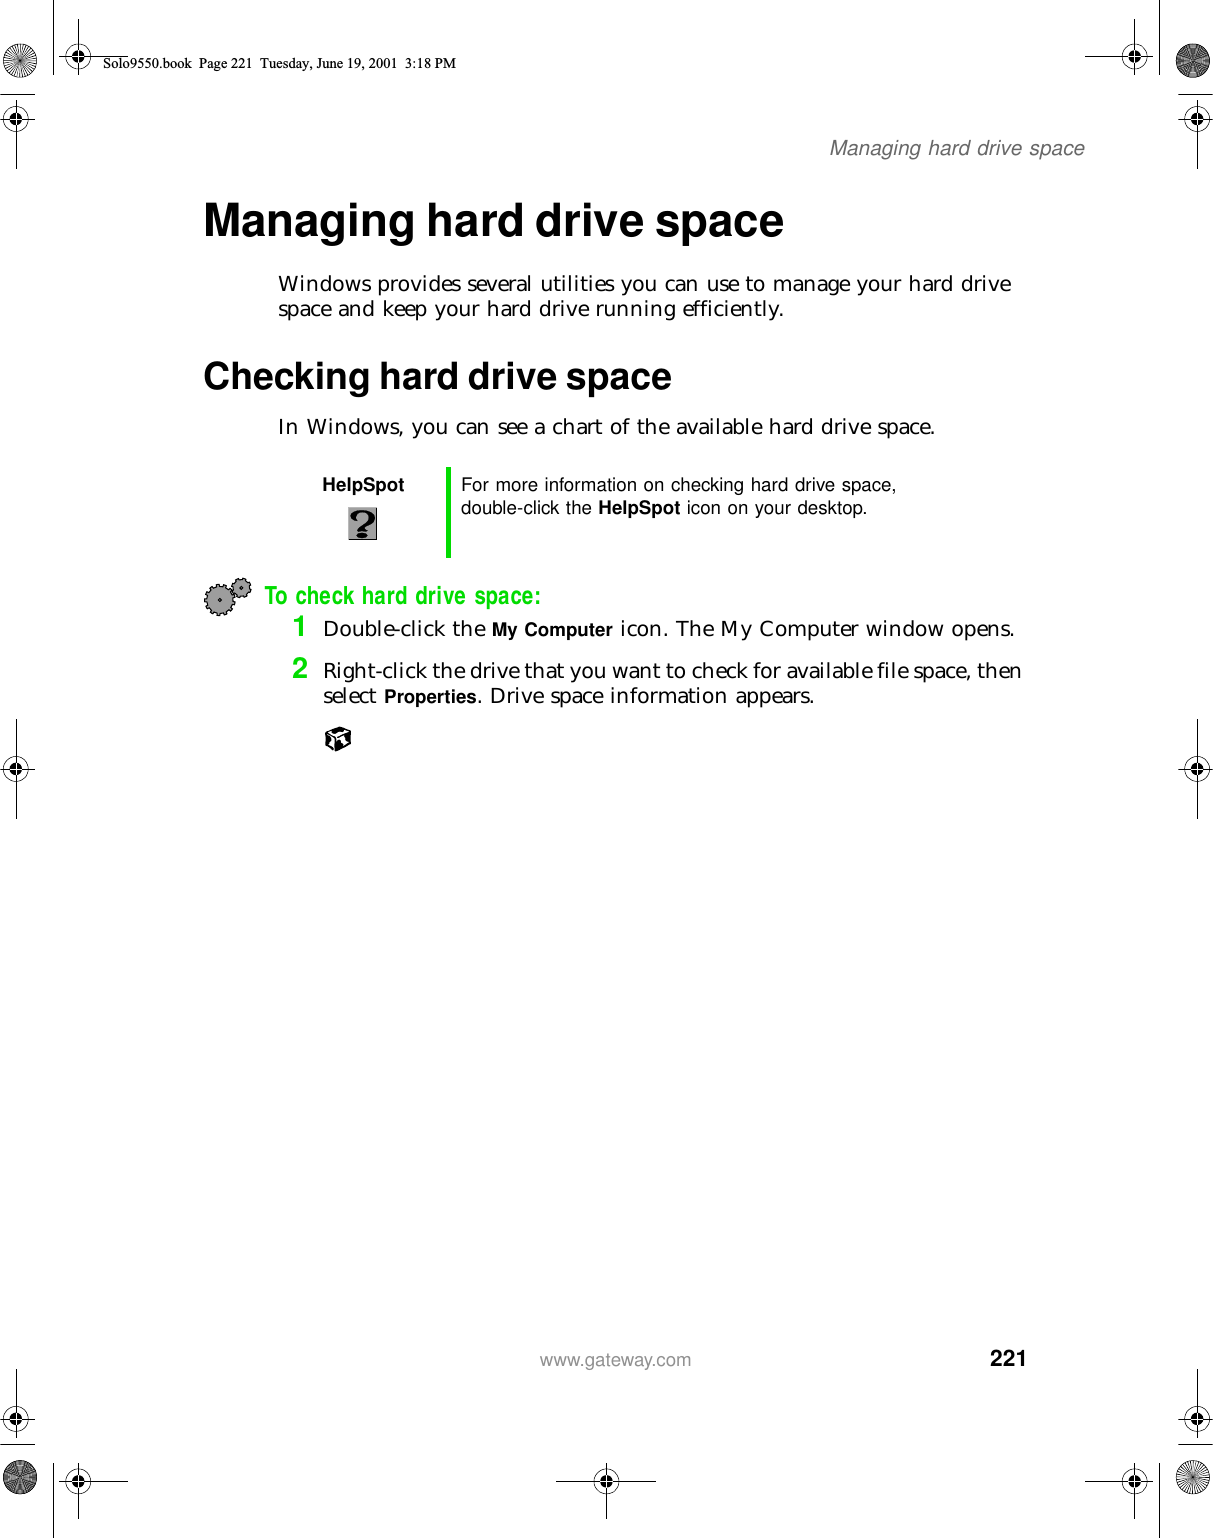 221Managing hard drive spacewww.gateway.comManaging hard drive spaceWindows provides several utilities you can use to manage your hard drive space and keep your hard drive running efficiently.Checking hard drive spaceIn Windows, you can see a chart of the available hard drive space.To check hard drive space:1Double-click the My Computer icon. The My Computer window opens.2Right-click the drive that you want to check for available file space, then select Properties. Drive space information appears.HelpSpot For more information on checking hard drive space, double-click the HelpSpot icon on your desktop.Solo9550.book Page 221 Tuesday, June 19, 2001 3:18 PM